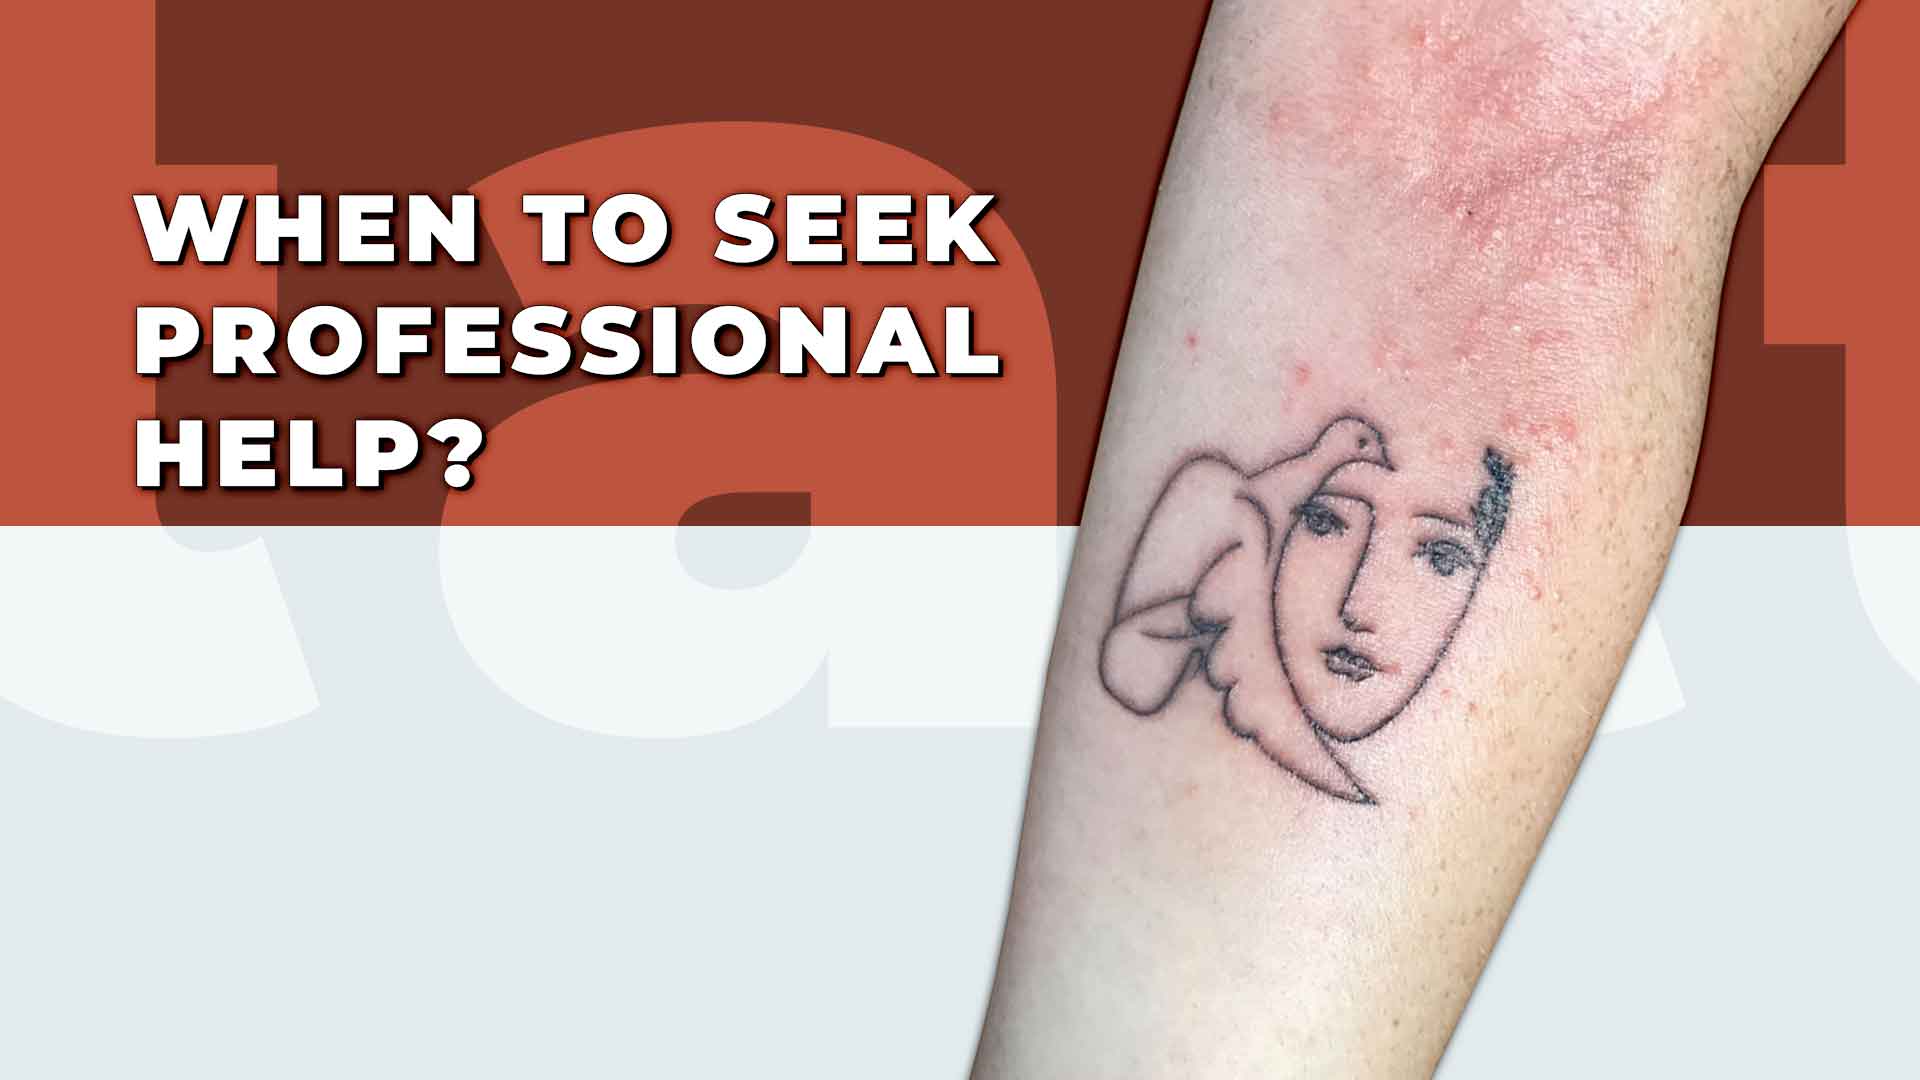 Tattoos and Eczema: Are They a Bad Idea?